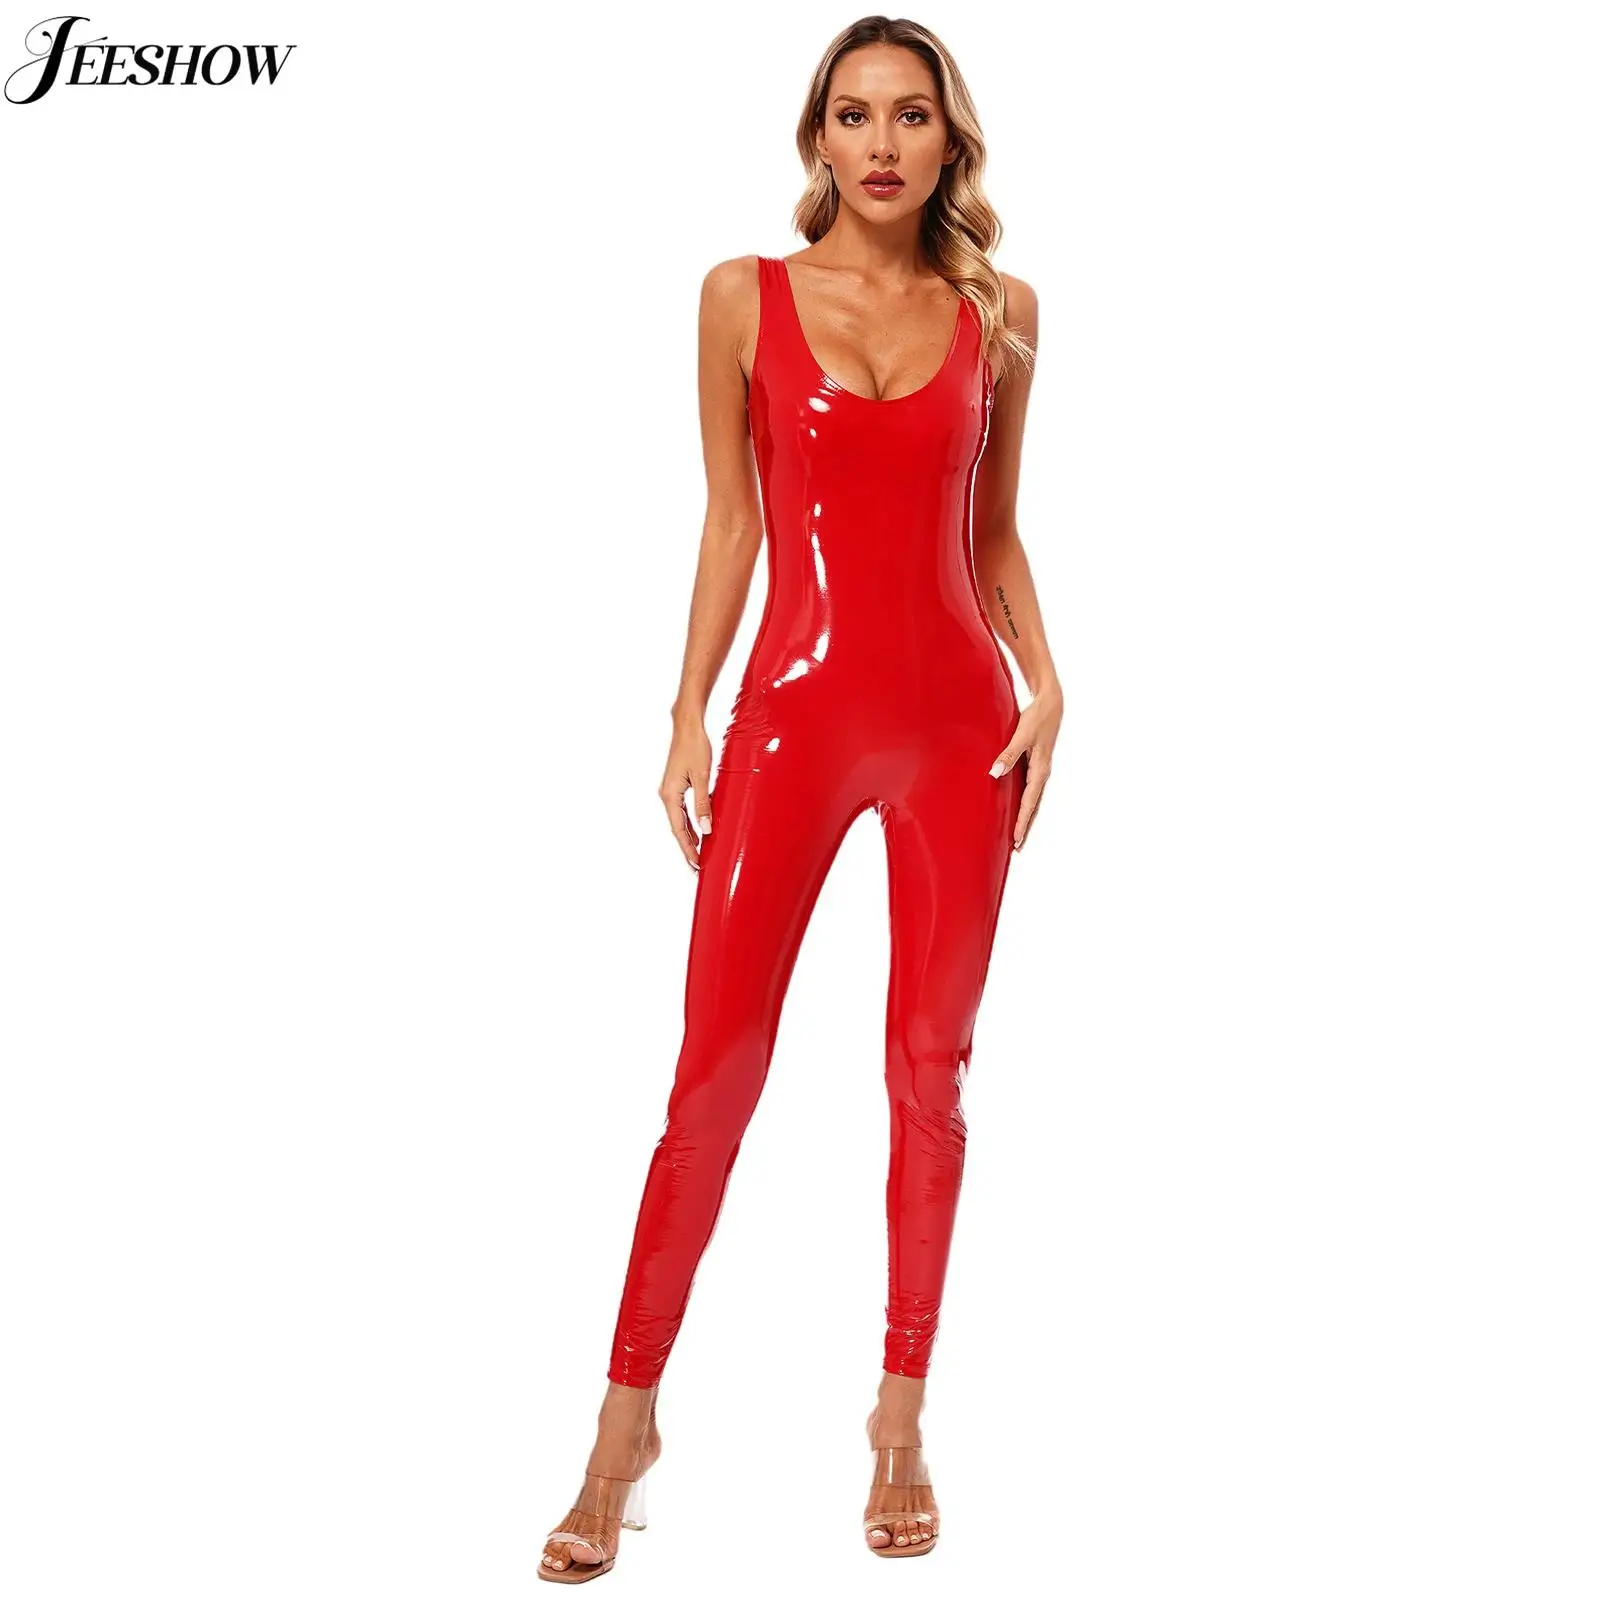 

Womens Glossy Leather Sleeveless Tight Tank Jumpsuit Scoop Neck Unitrad Rompers Wet Look Skinny Pants Bodysuit Latex Catsuits